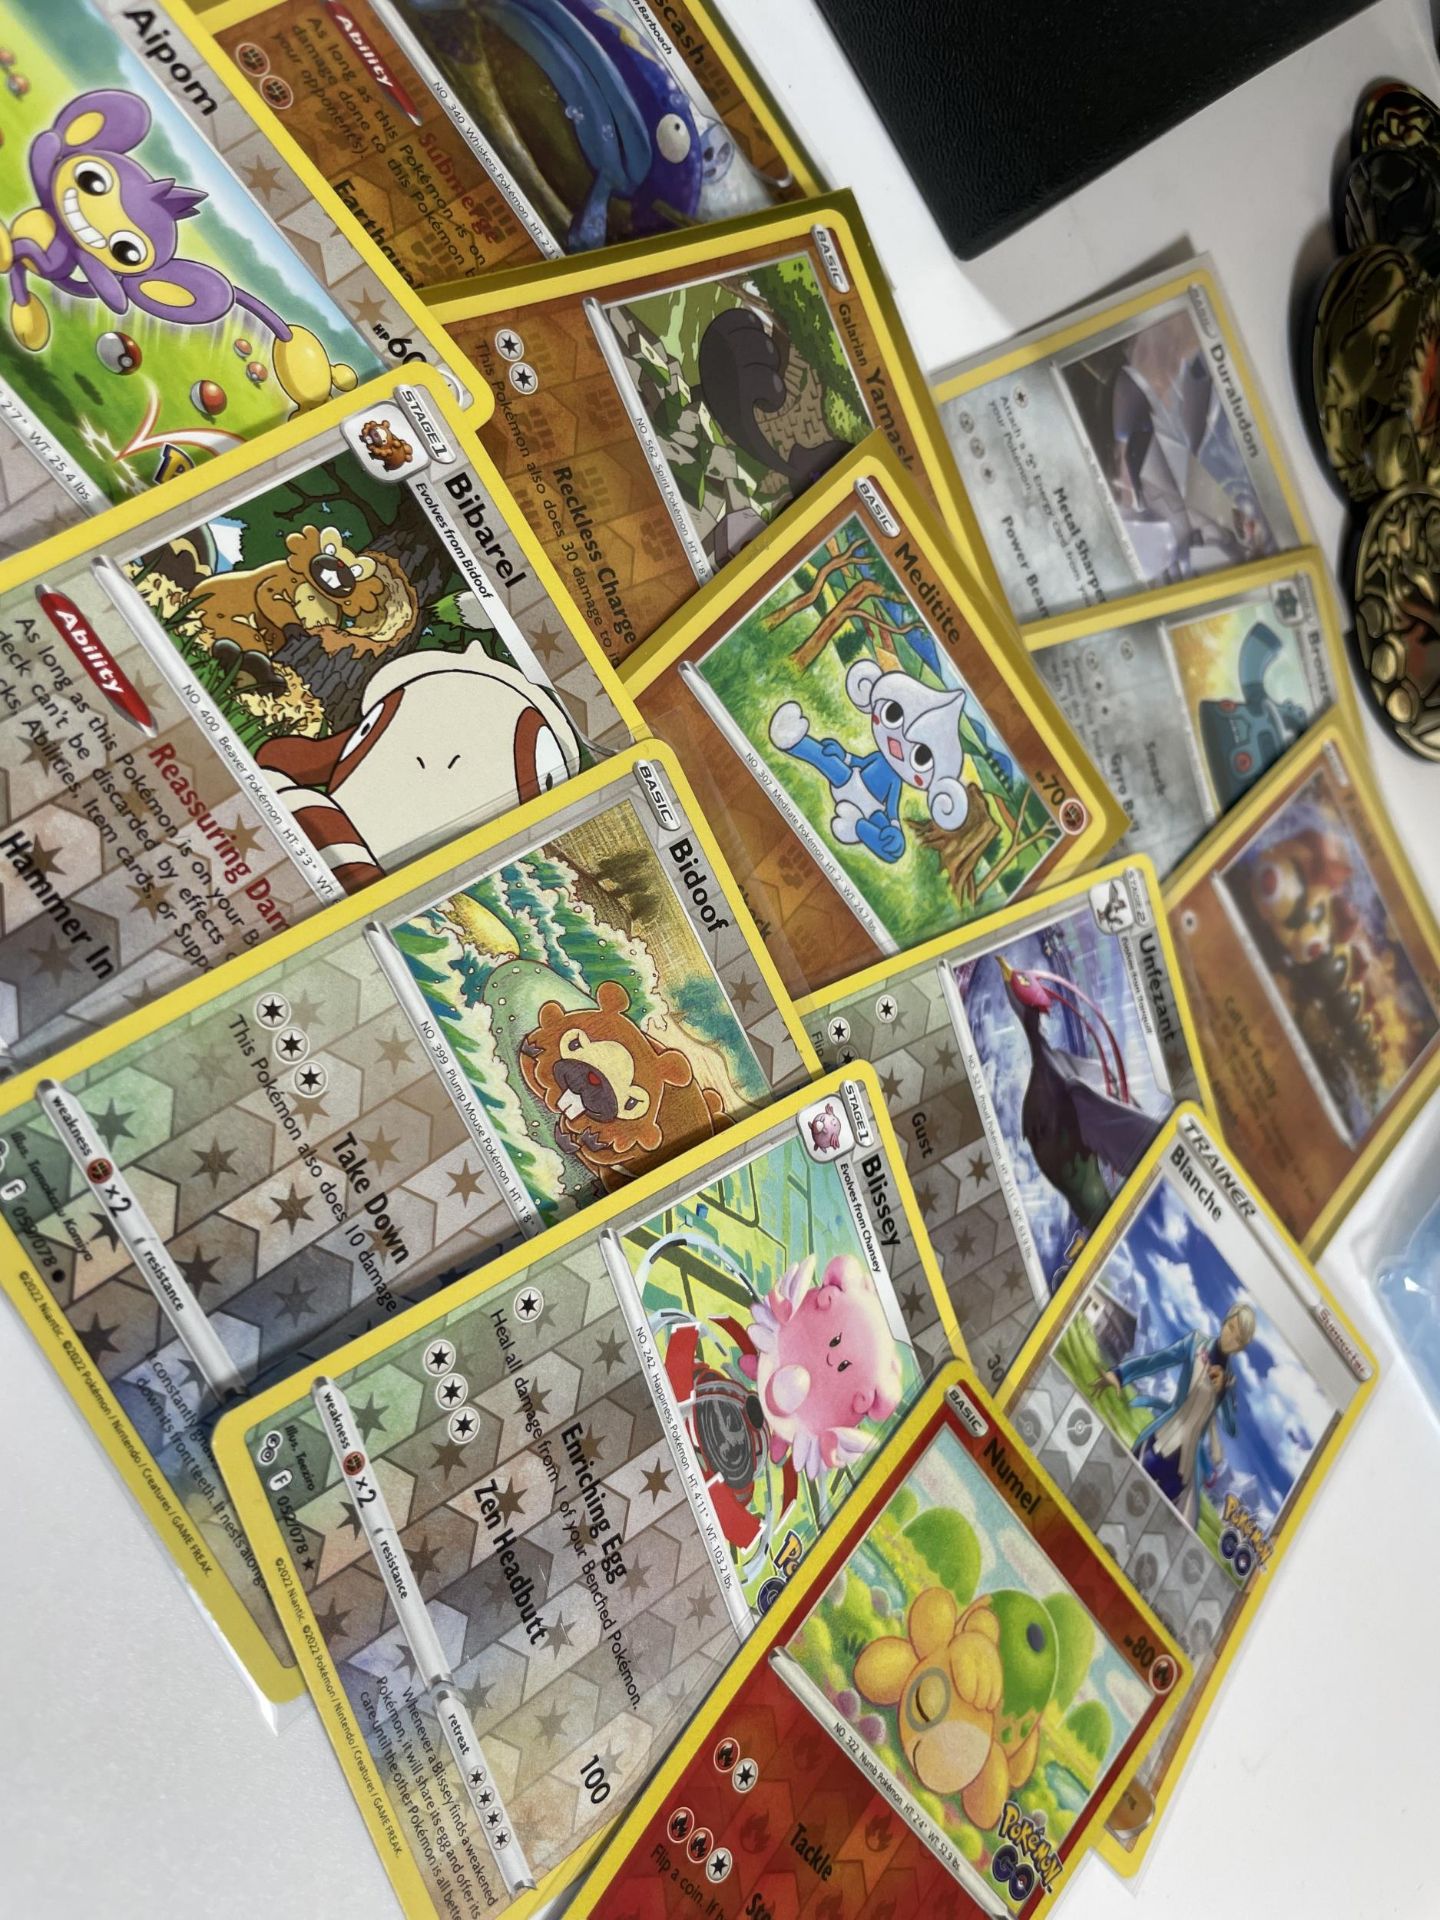 A POKEMON TRAINER BOX FULL OF ASSORTED CARDS, HOLOS, TOKENS ETC - Image 6 of 6